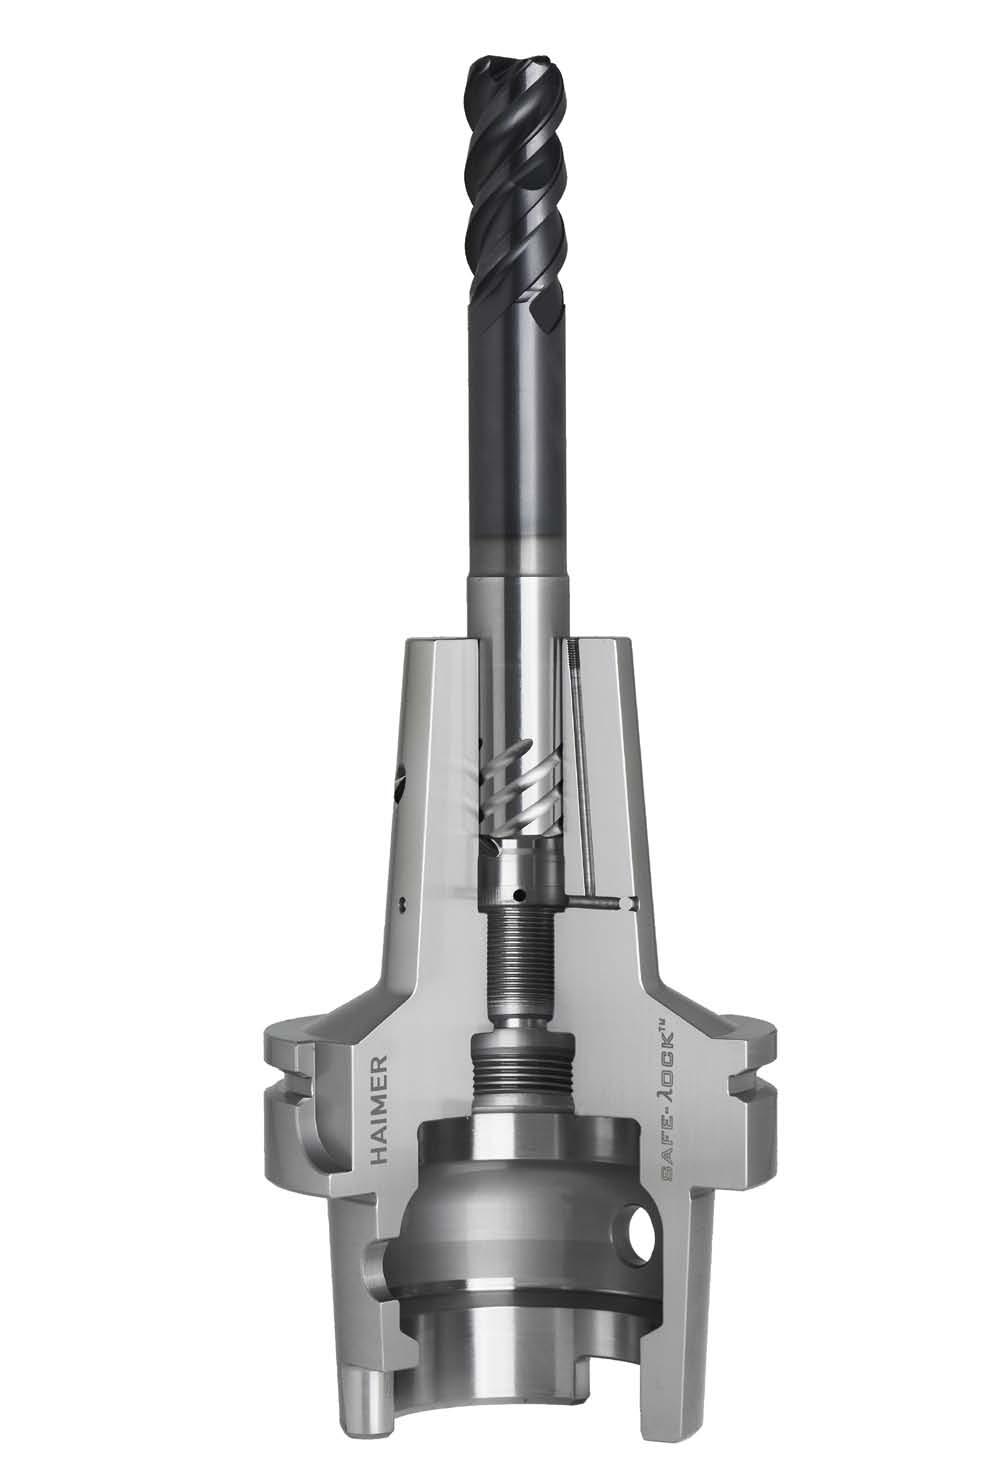 High-quality workpieces become scrap as a result. The Safe-Lock system offers help.